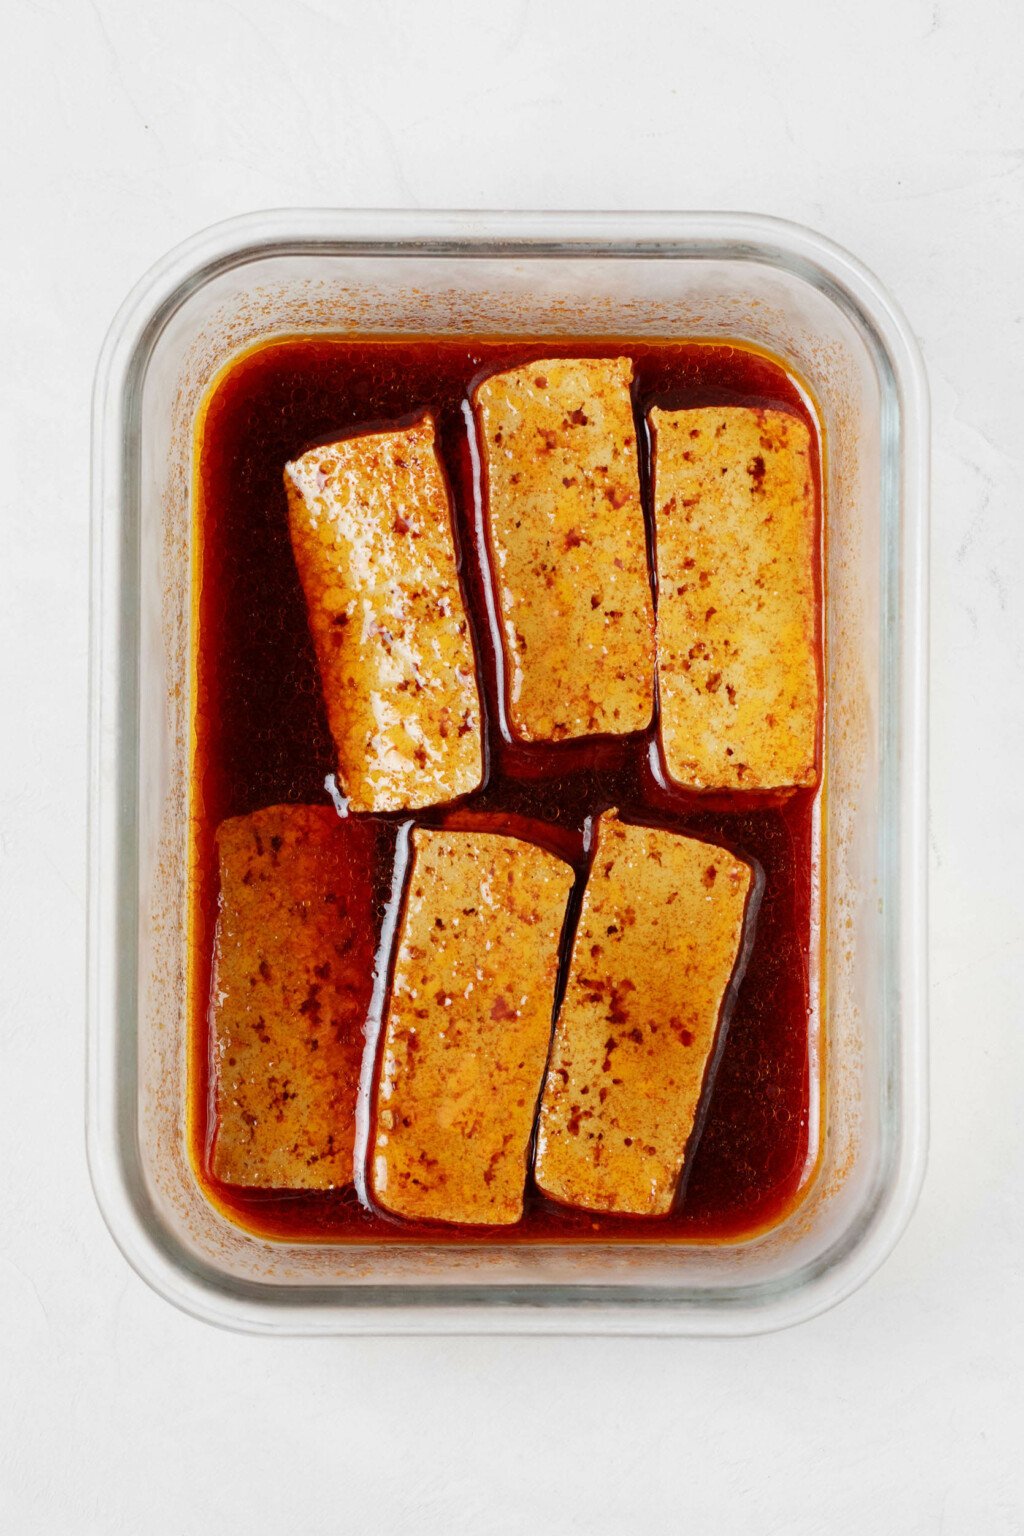 A rectangular storage container holds slices of tofu that are being seasoned with a reddish brown marinade.